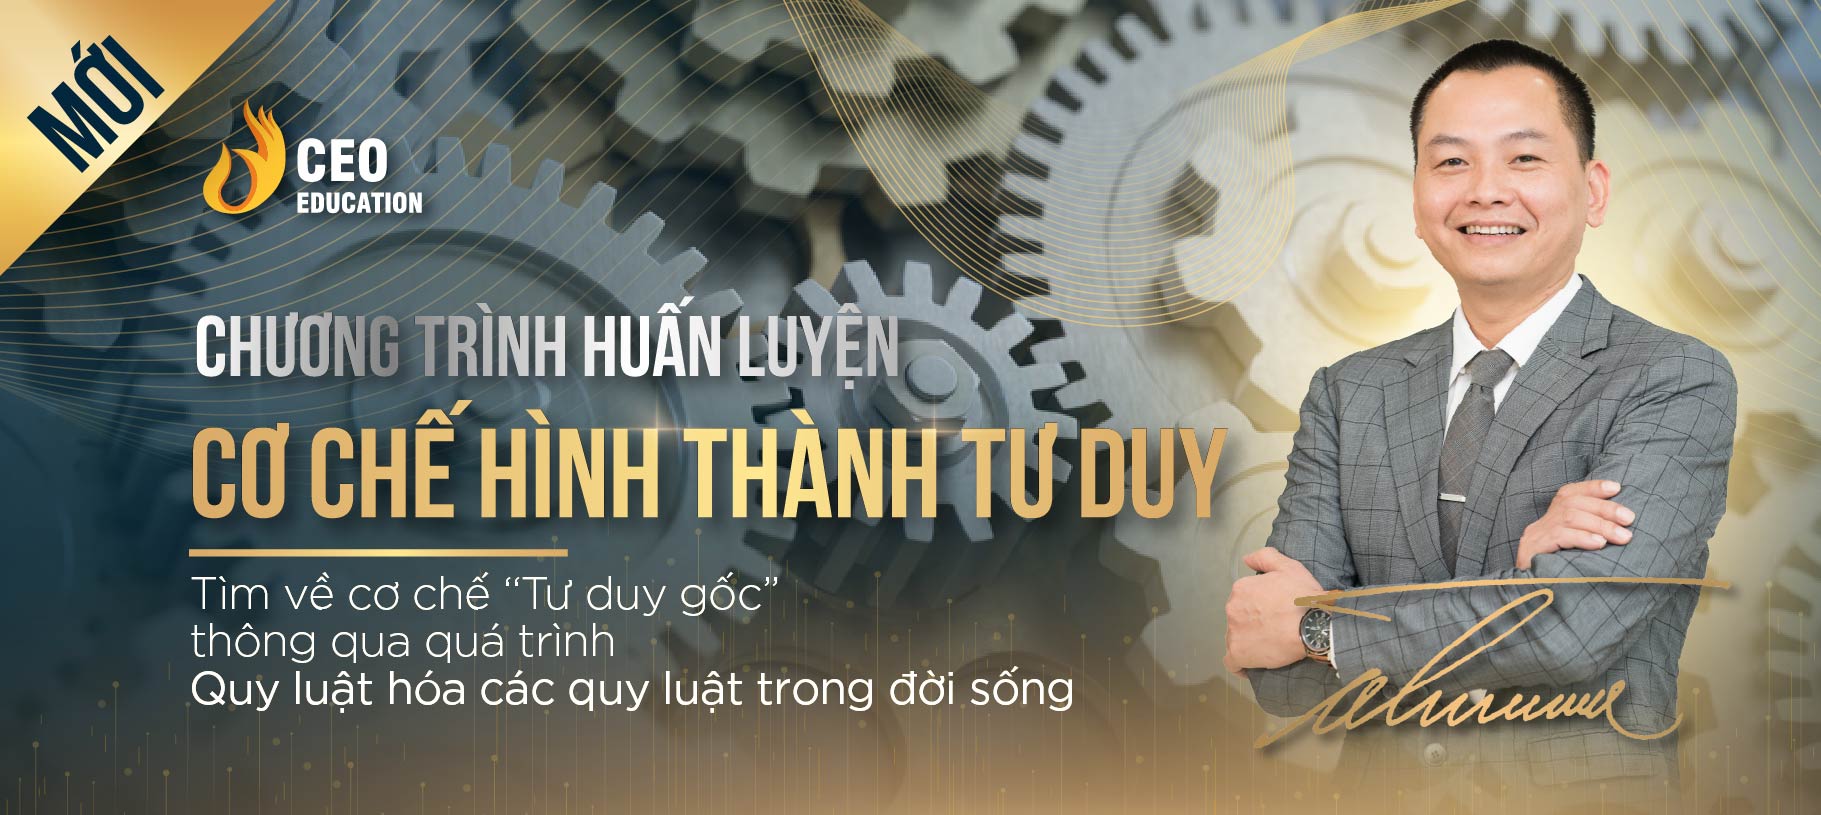 co_che_hinh_thanh_tu_duy_banner_chinh